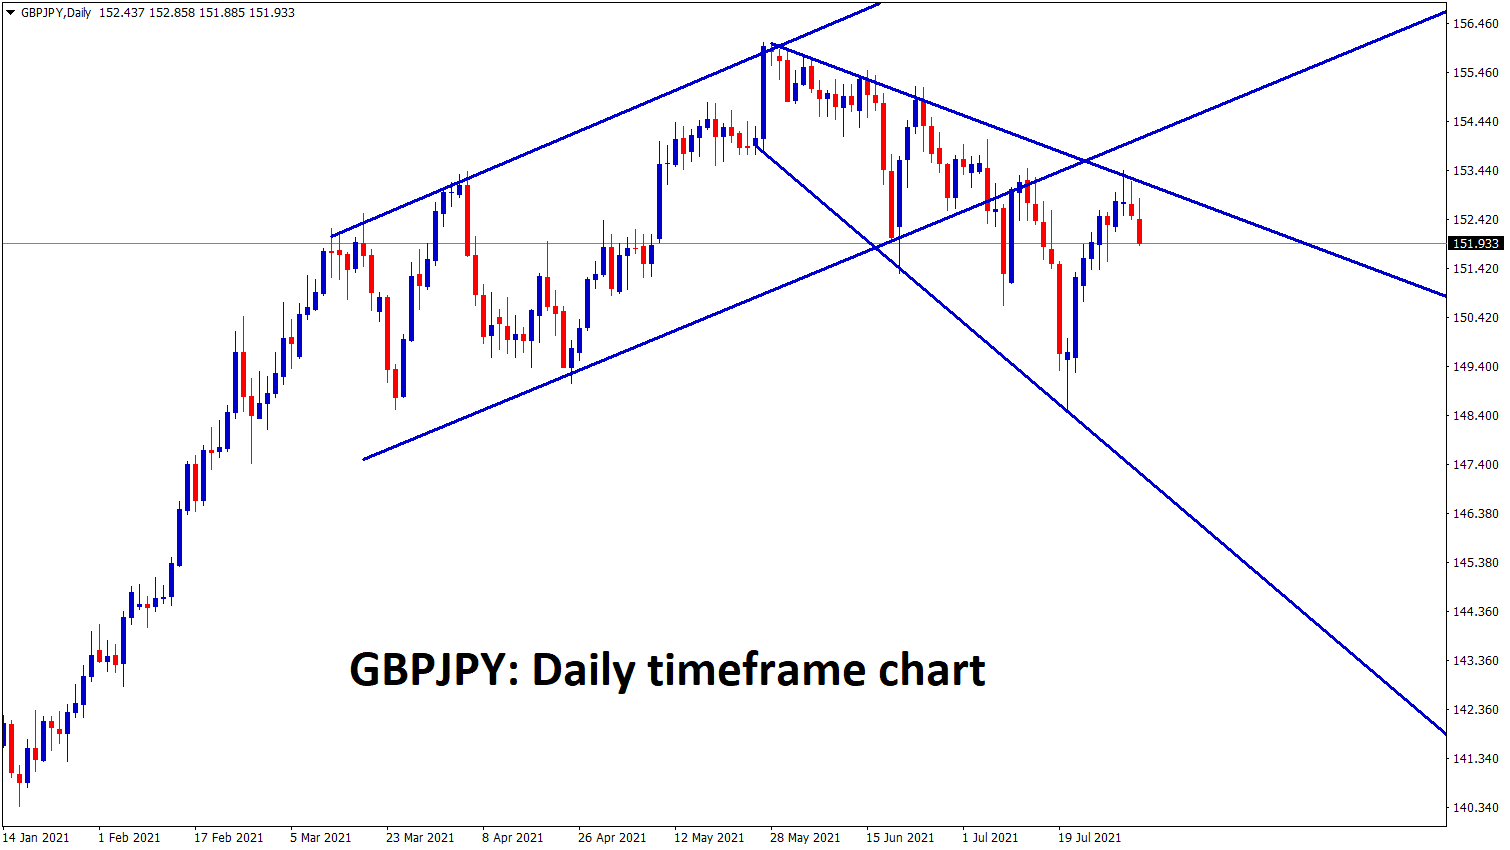 GBPJPY has formed an Expanding Triangle after breaking the bottom of the Ascending channel